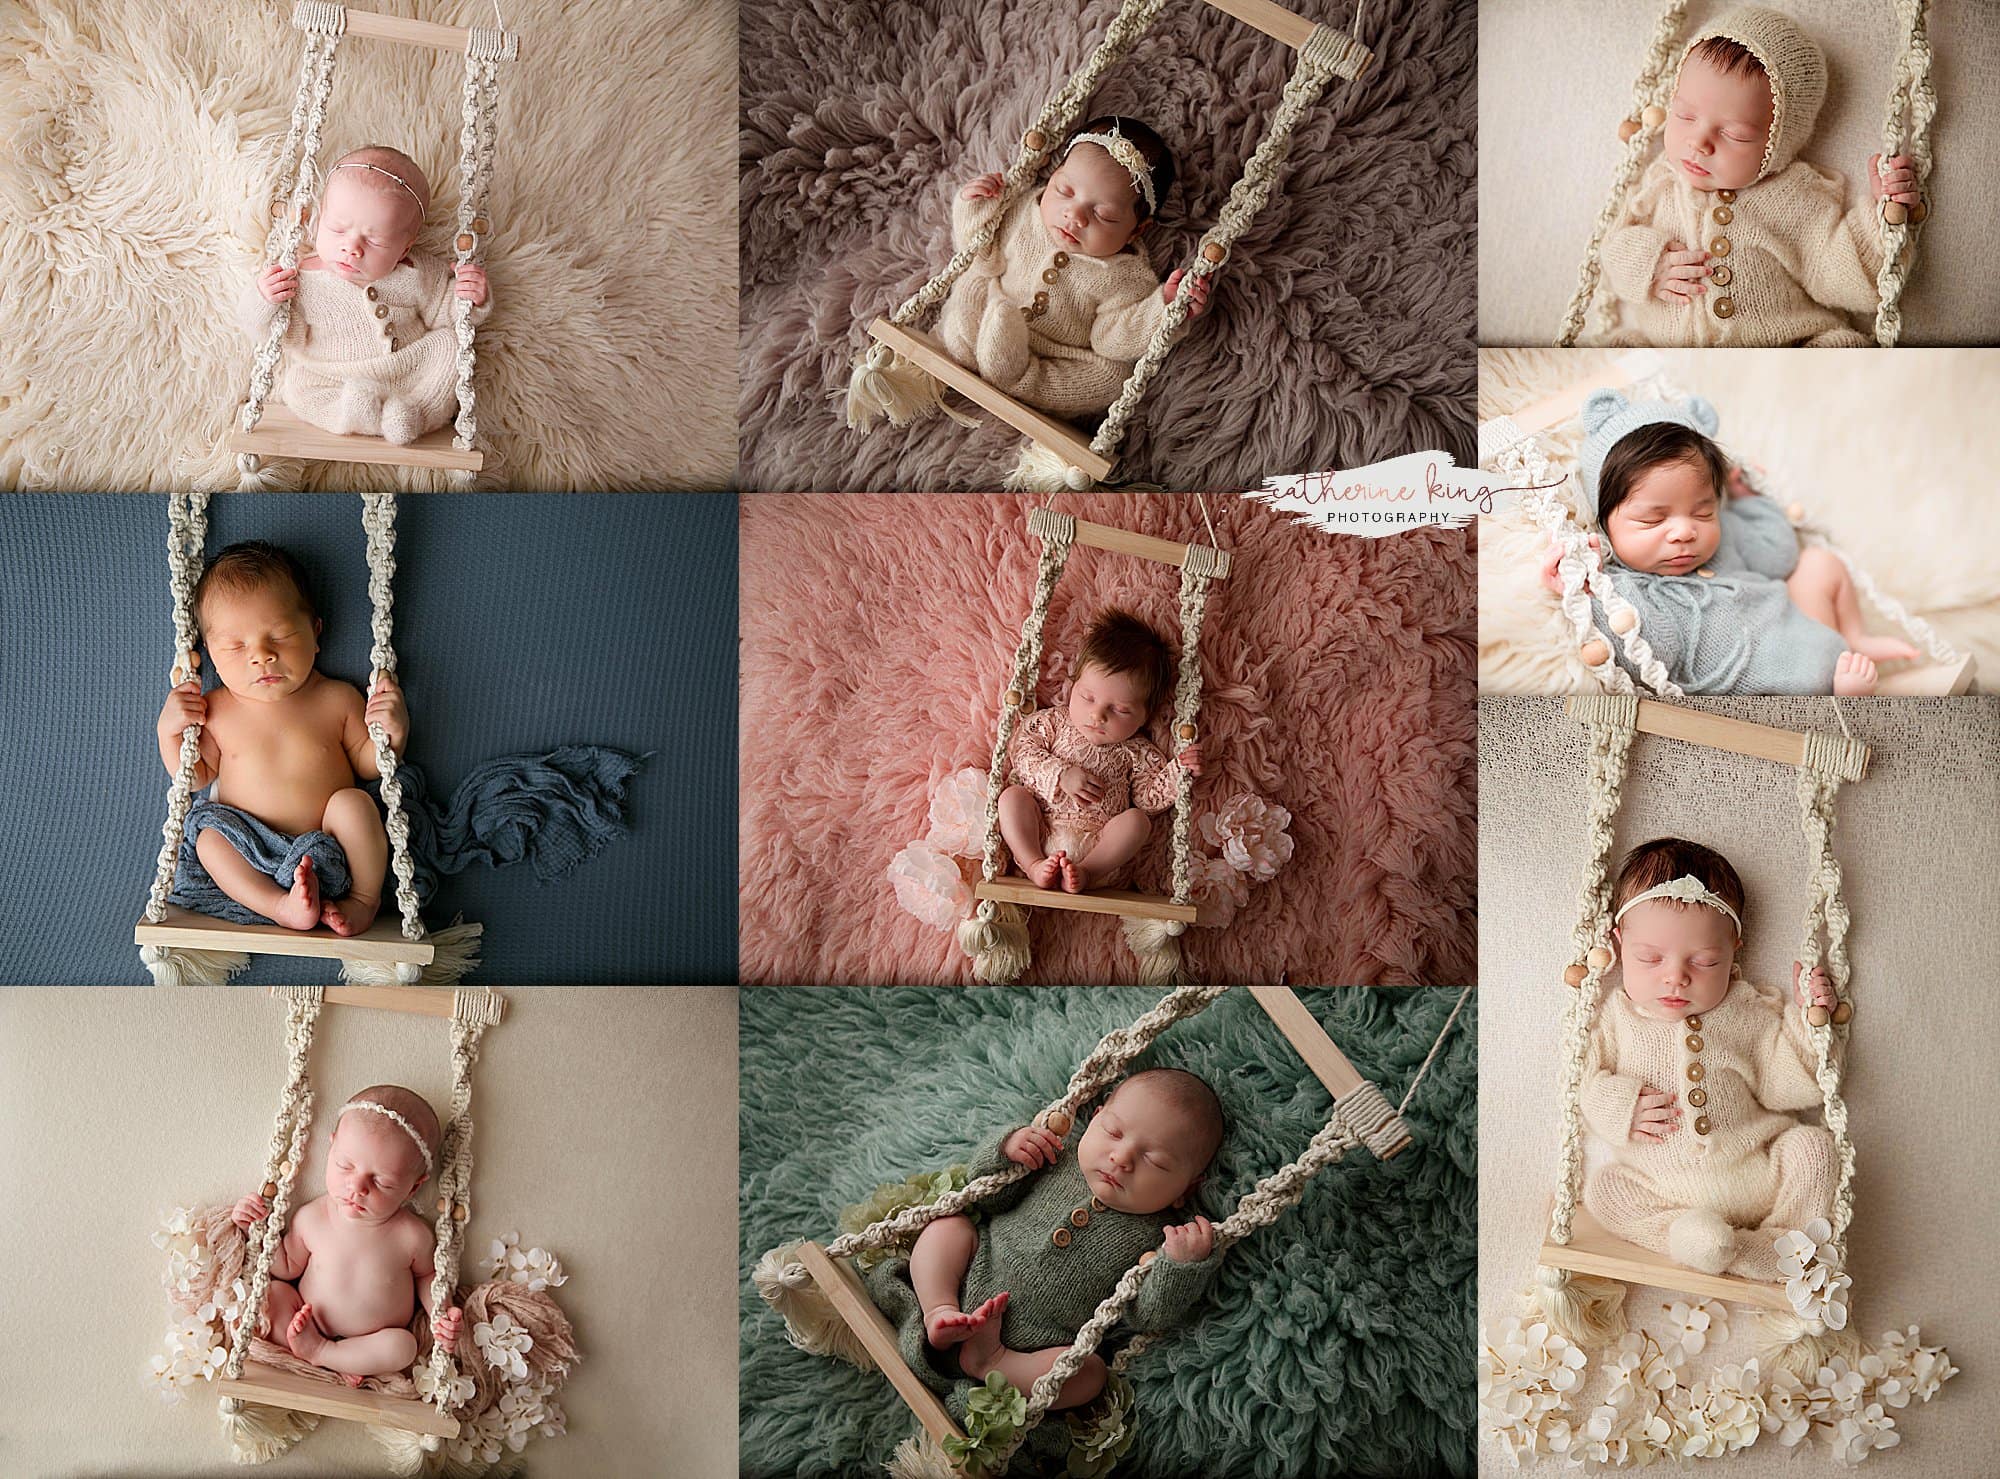 op 5 Client-Requested Props for Your CT Newborn Photography Session